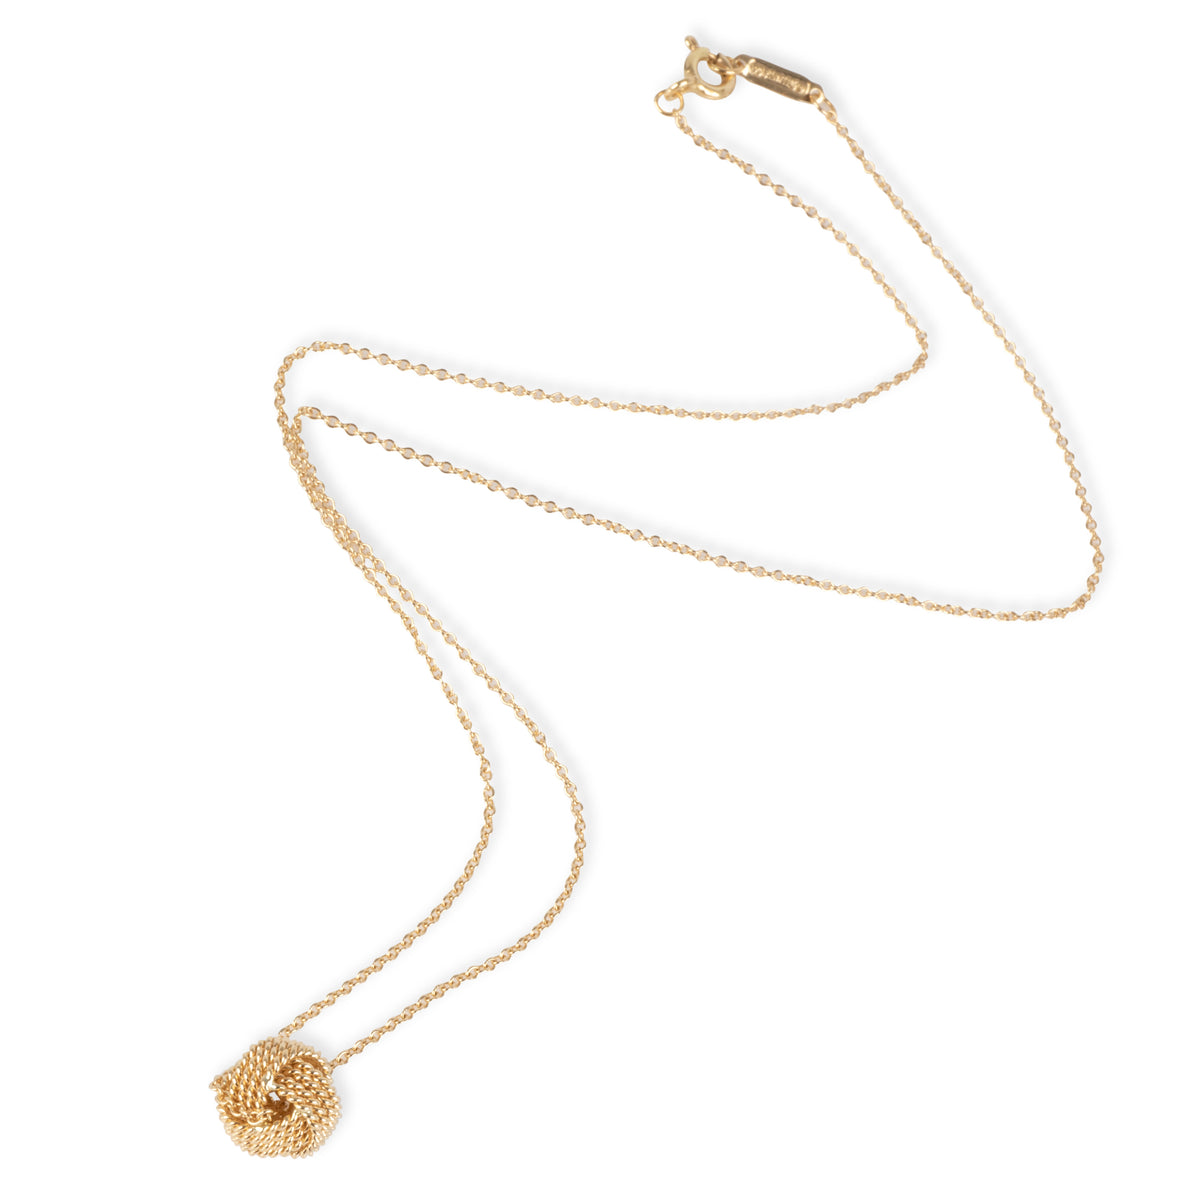 Tiffany & Co. Somerset Knot Necklace in 18K Yellow Gold